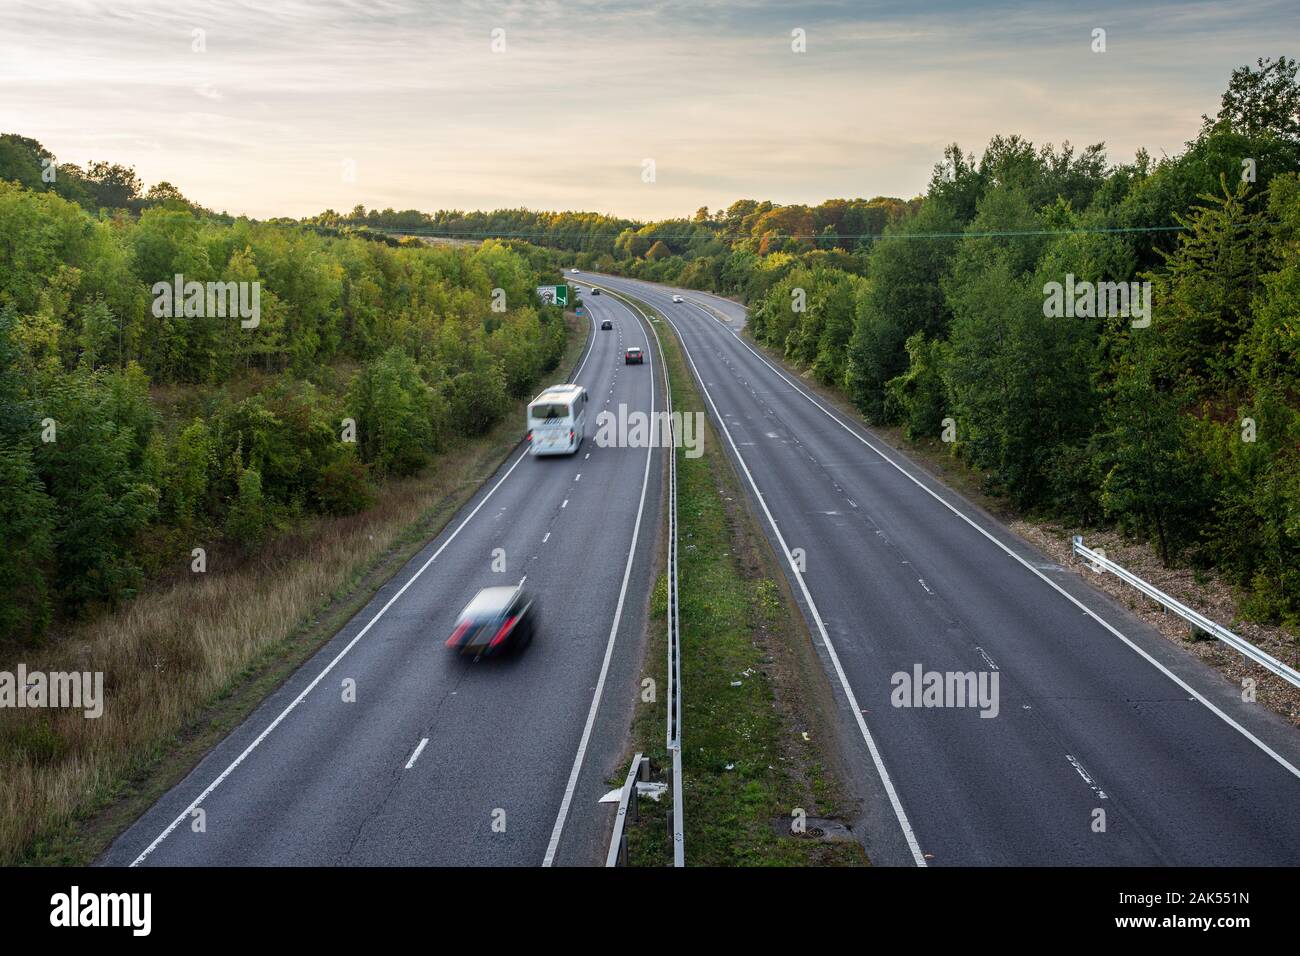 Tring, England, UK - September 14, 2019: Light traffic flows on the A41 dual carriageway near Tring in Hertfordshire in the London commuter belt. Stock Photo